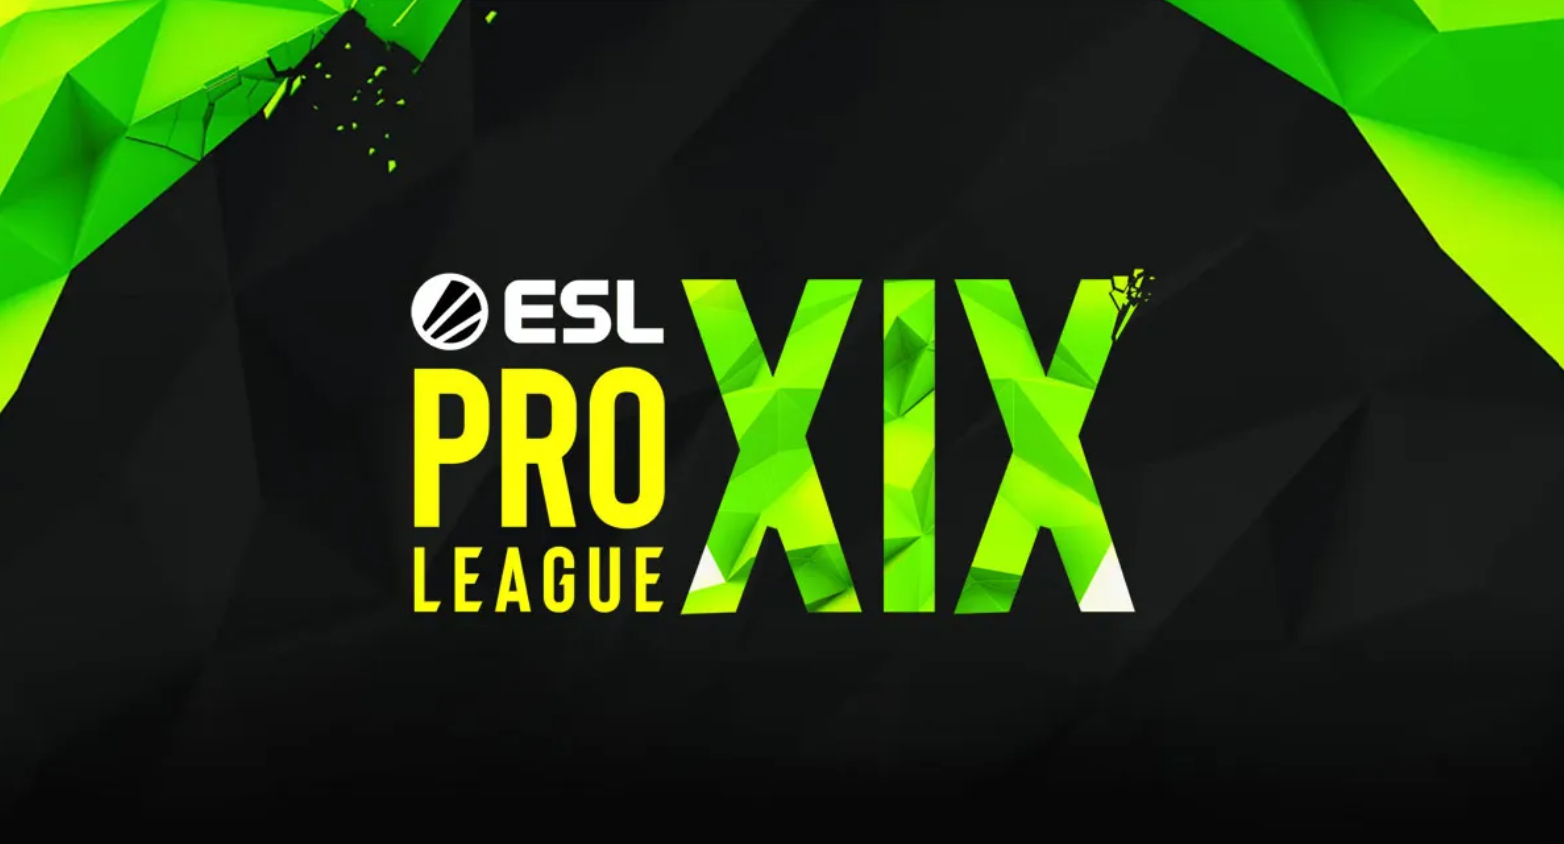 Season 19 of ESL Pro League Features Matches Between G2 and Mongolz, Fnatic and Eternal Fire